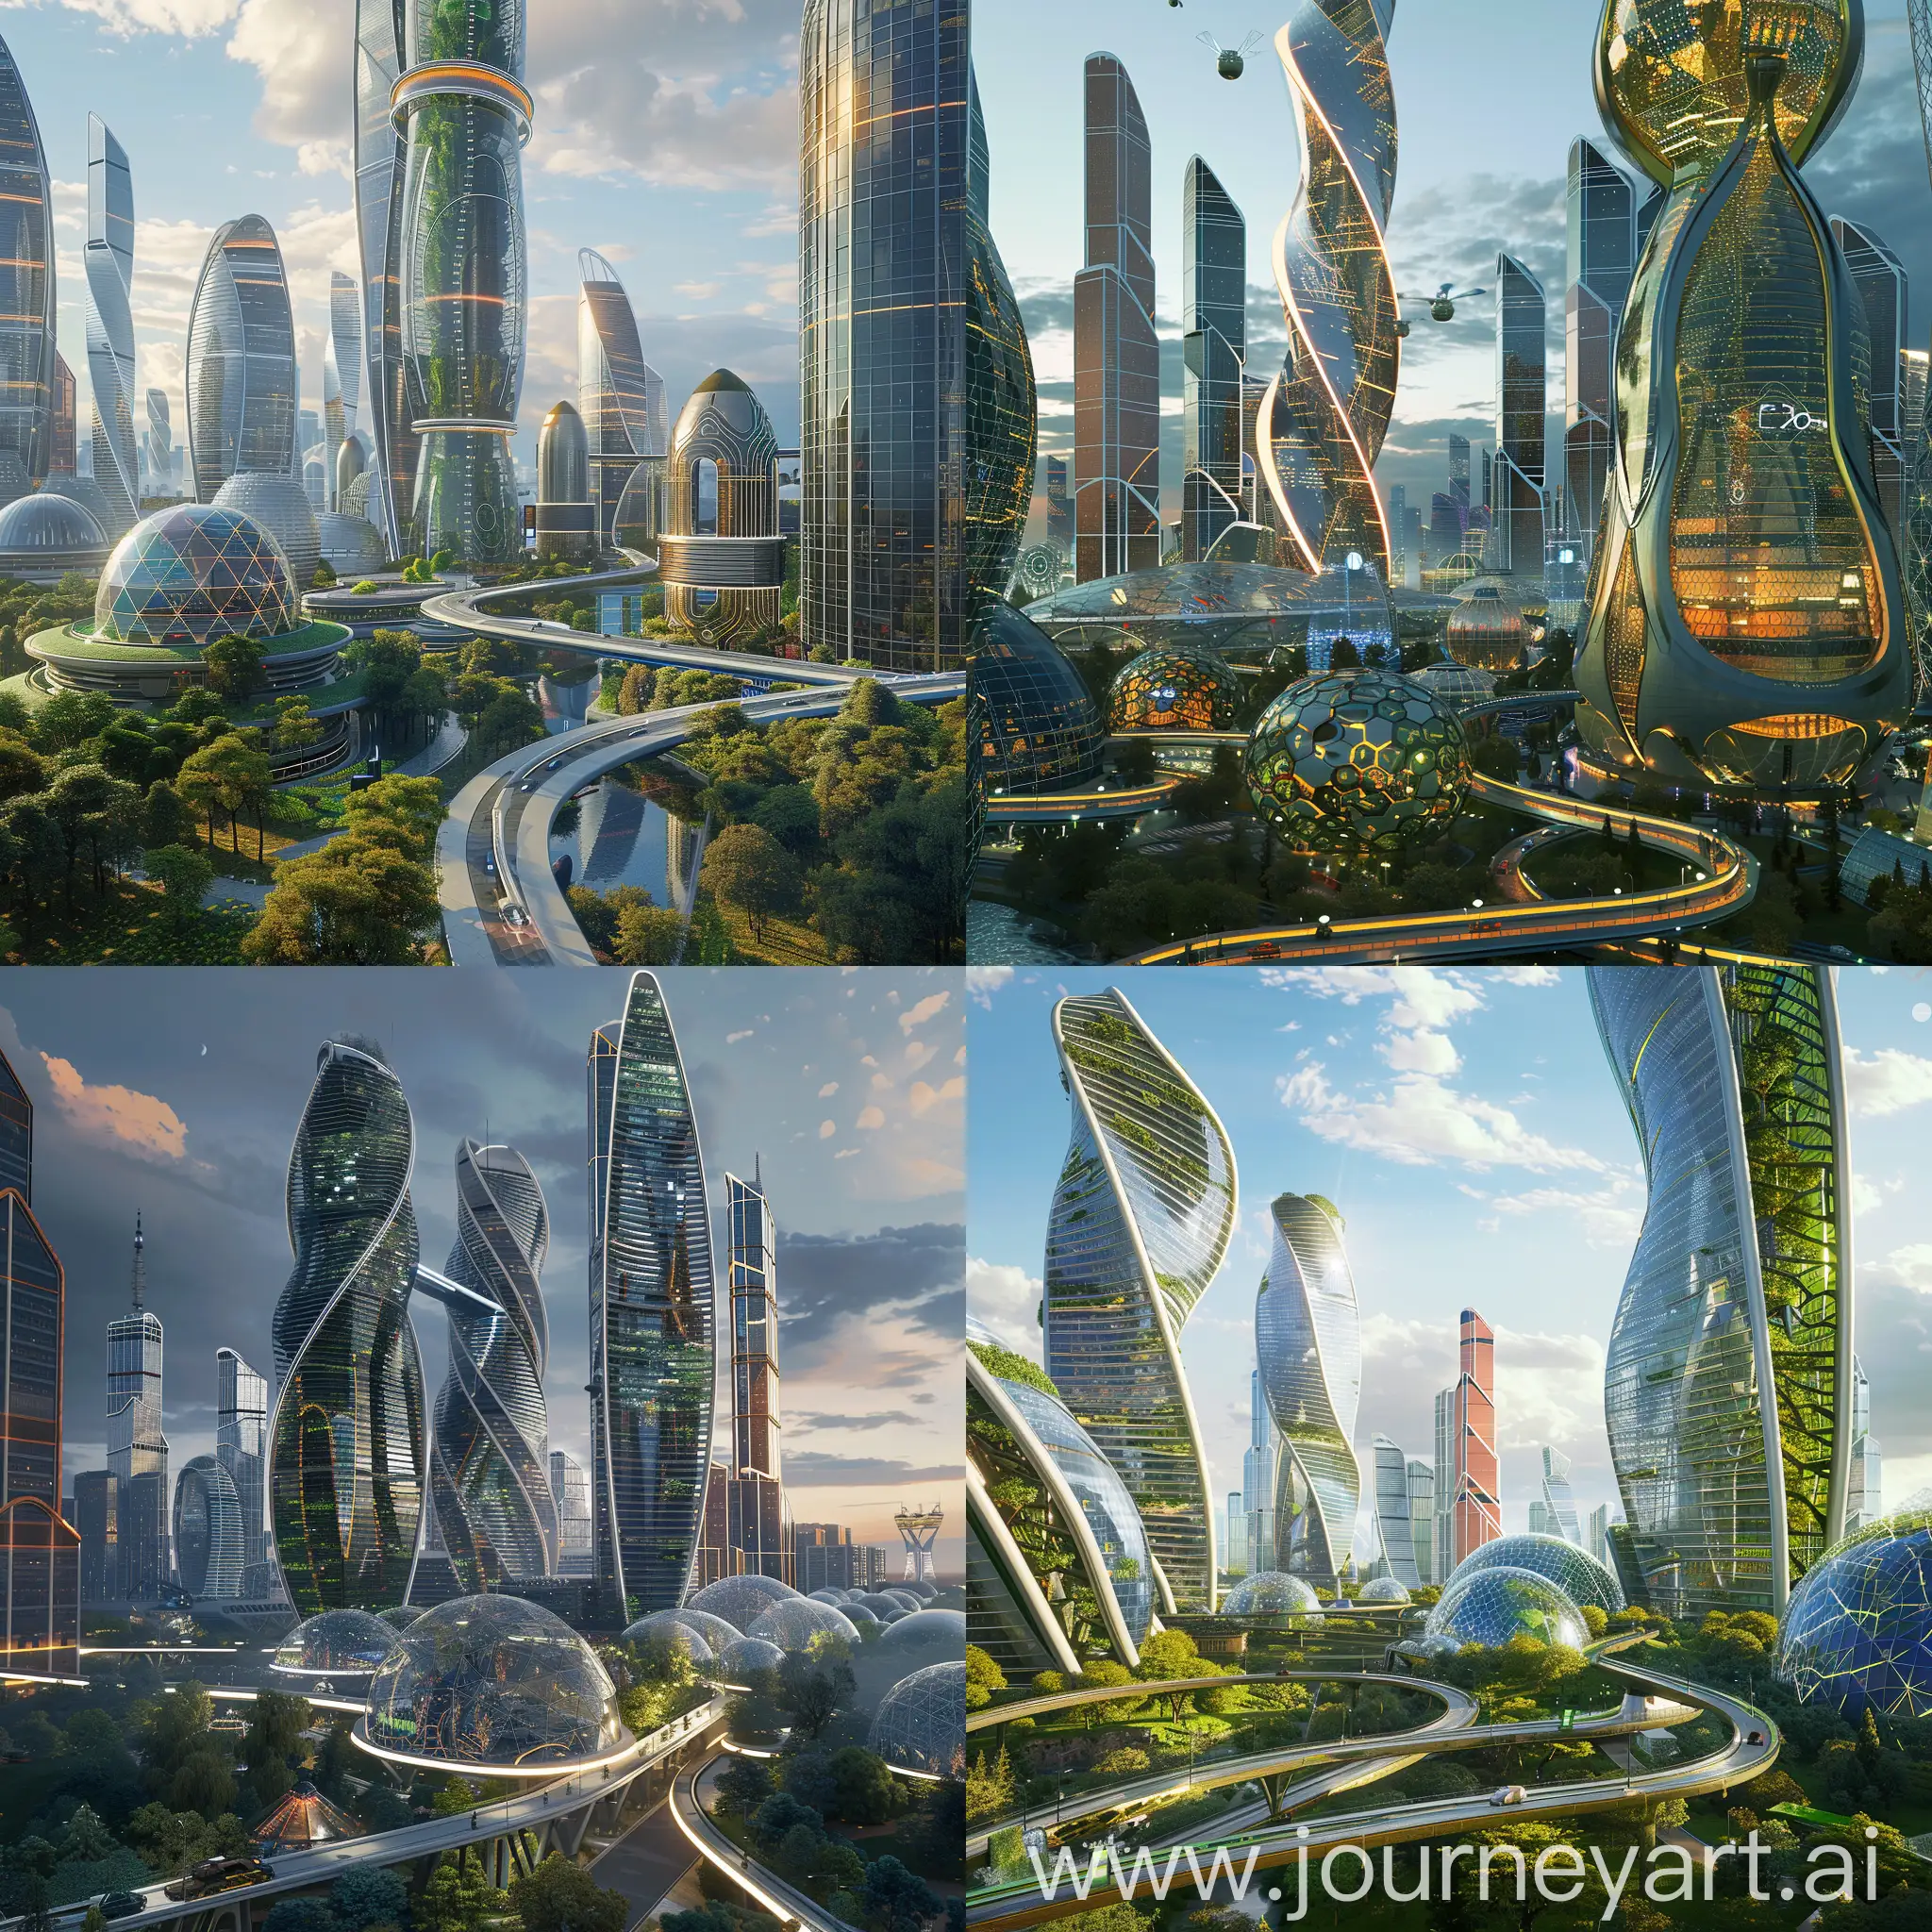 Futuristic Moscow, in futuristic style,  Integrative Energy Crystals,  Quantum Mesh Networks, Aerogel Skyscrapers, Bionic Infrastructure, Augmented Reality Integration, Hyperloop Transit Hub, Nanobot Maintenance Swarm, Quantum Computing Centers, Bioluminescent Gardens, Conscious City AI, Geodesic Dome Enclaves, Sky Bridges and Elevated Walkways, Vertical Forest Towers, Solar Sail Skyscrapers, Kinetic Facades, Aquatic Megaprojects, Aerohive Skyports, Hyper-Reflective Megastructures, Terraformed Urban Parks, Interstellar Architectural Wonders, 2500s, unreal engine 5 --stylize 1000